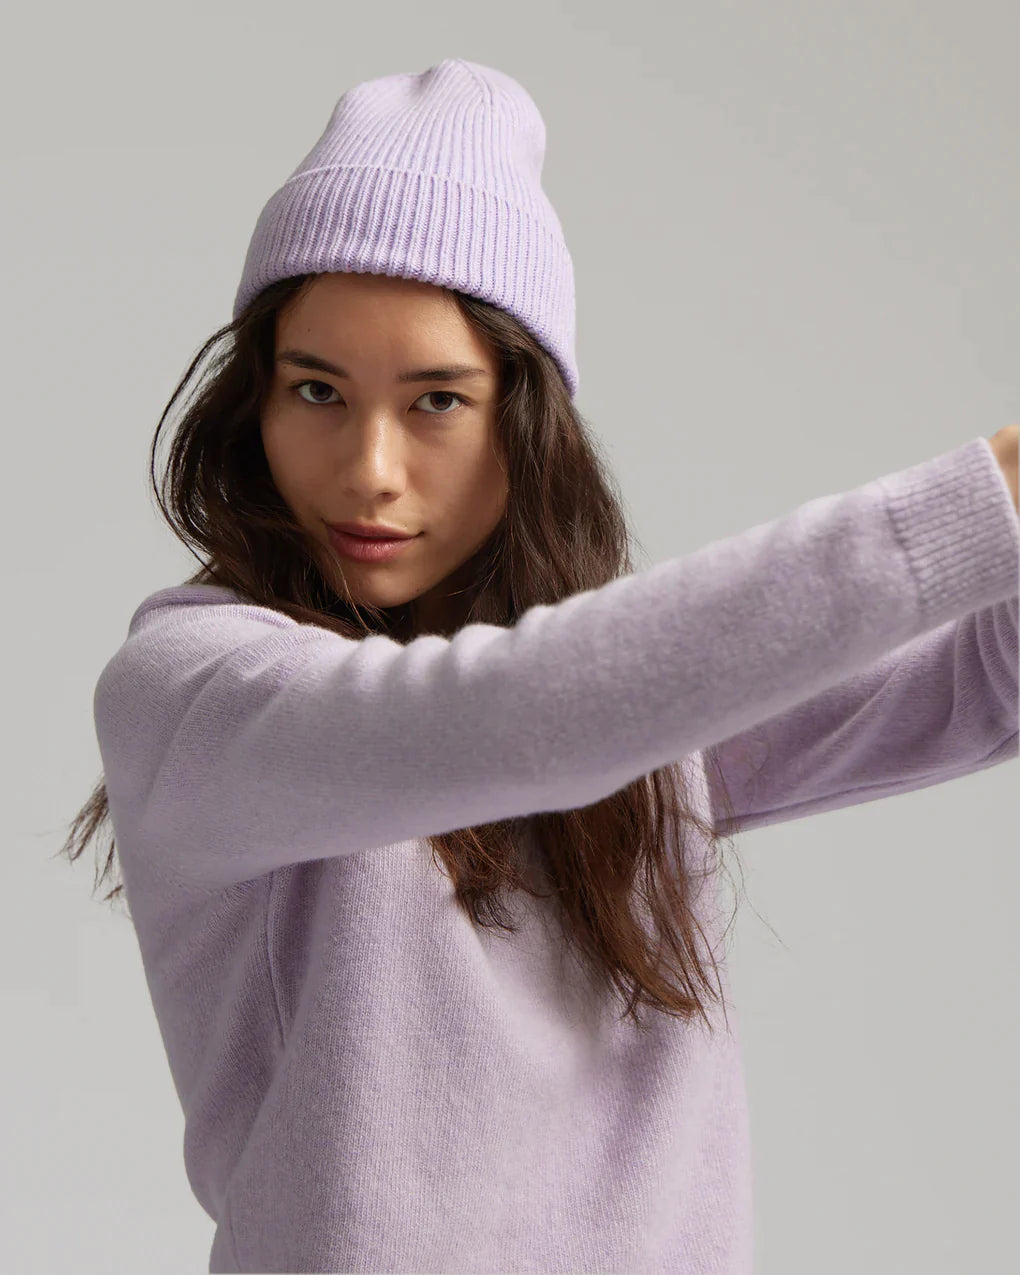 A woman wearing a lavender sweater and beanie.